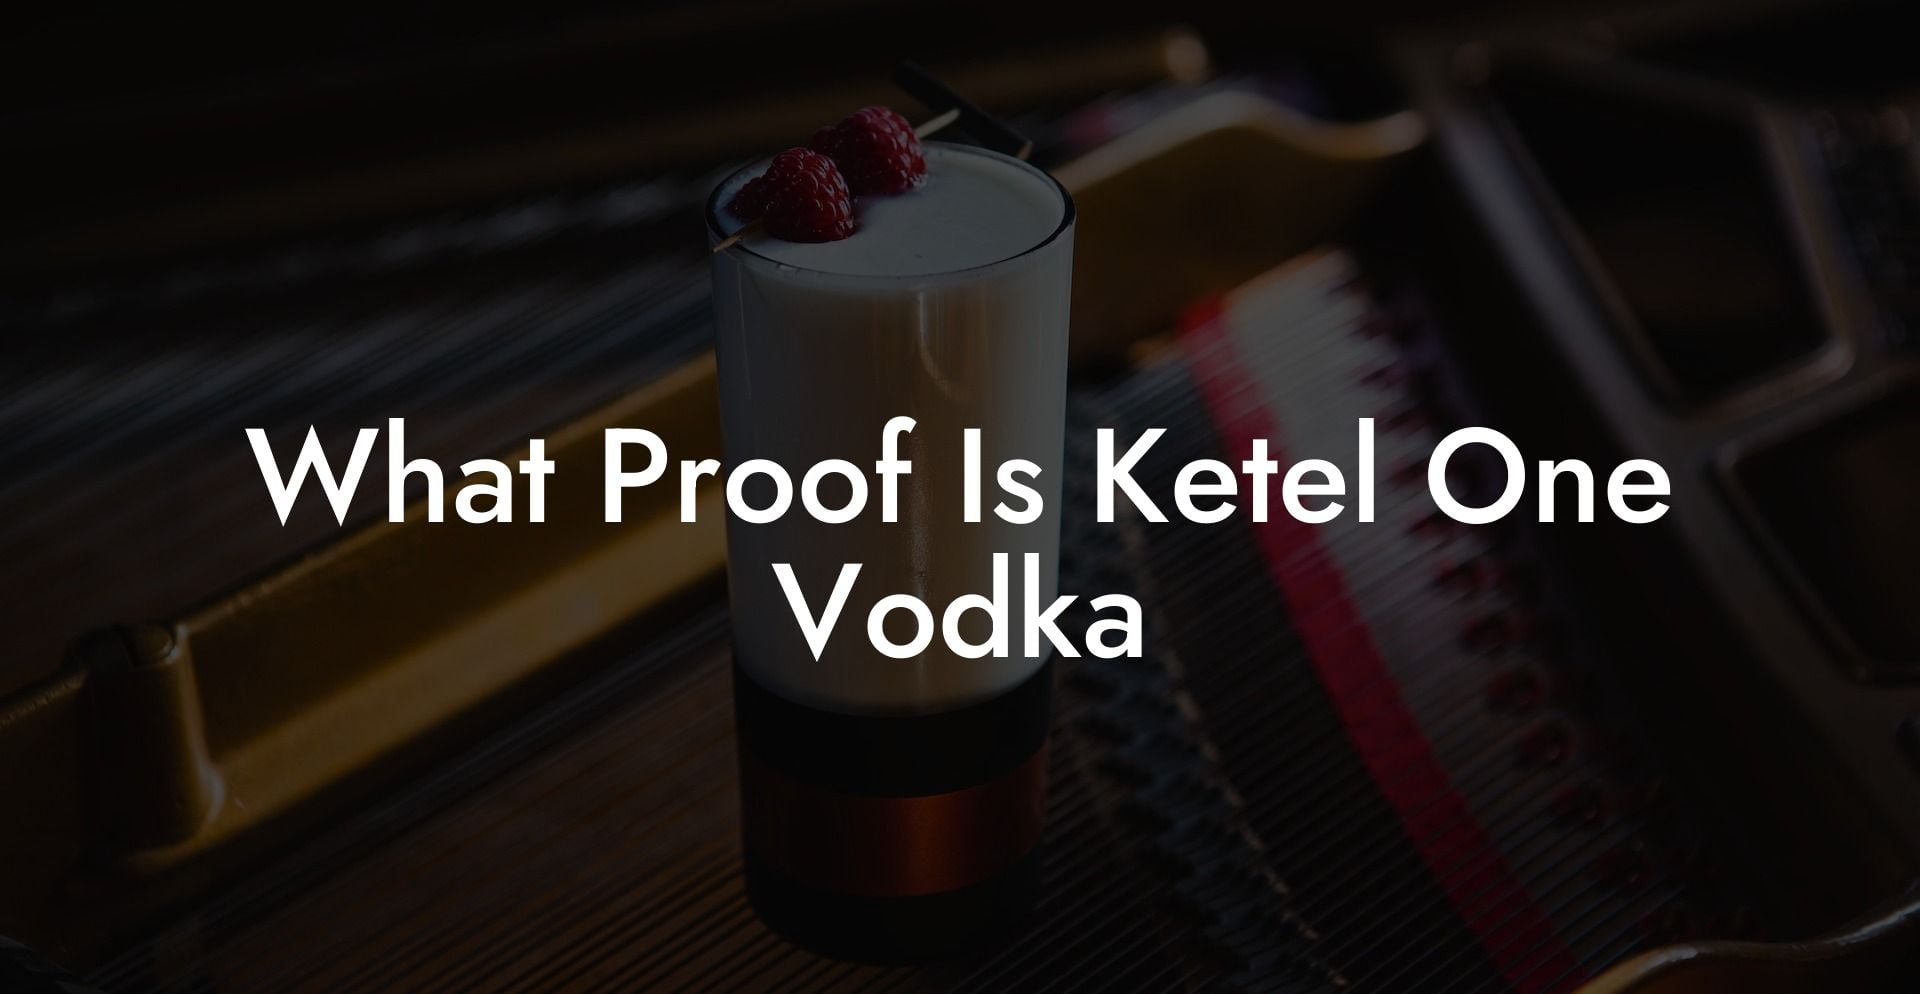 What Proof Is Ketel One Vodka